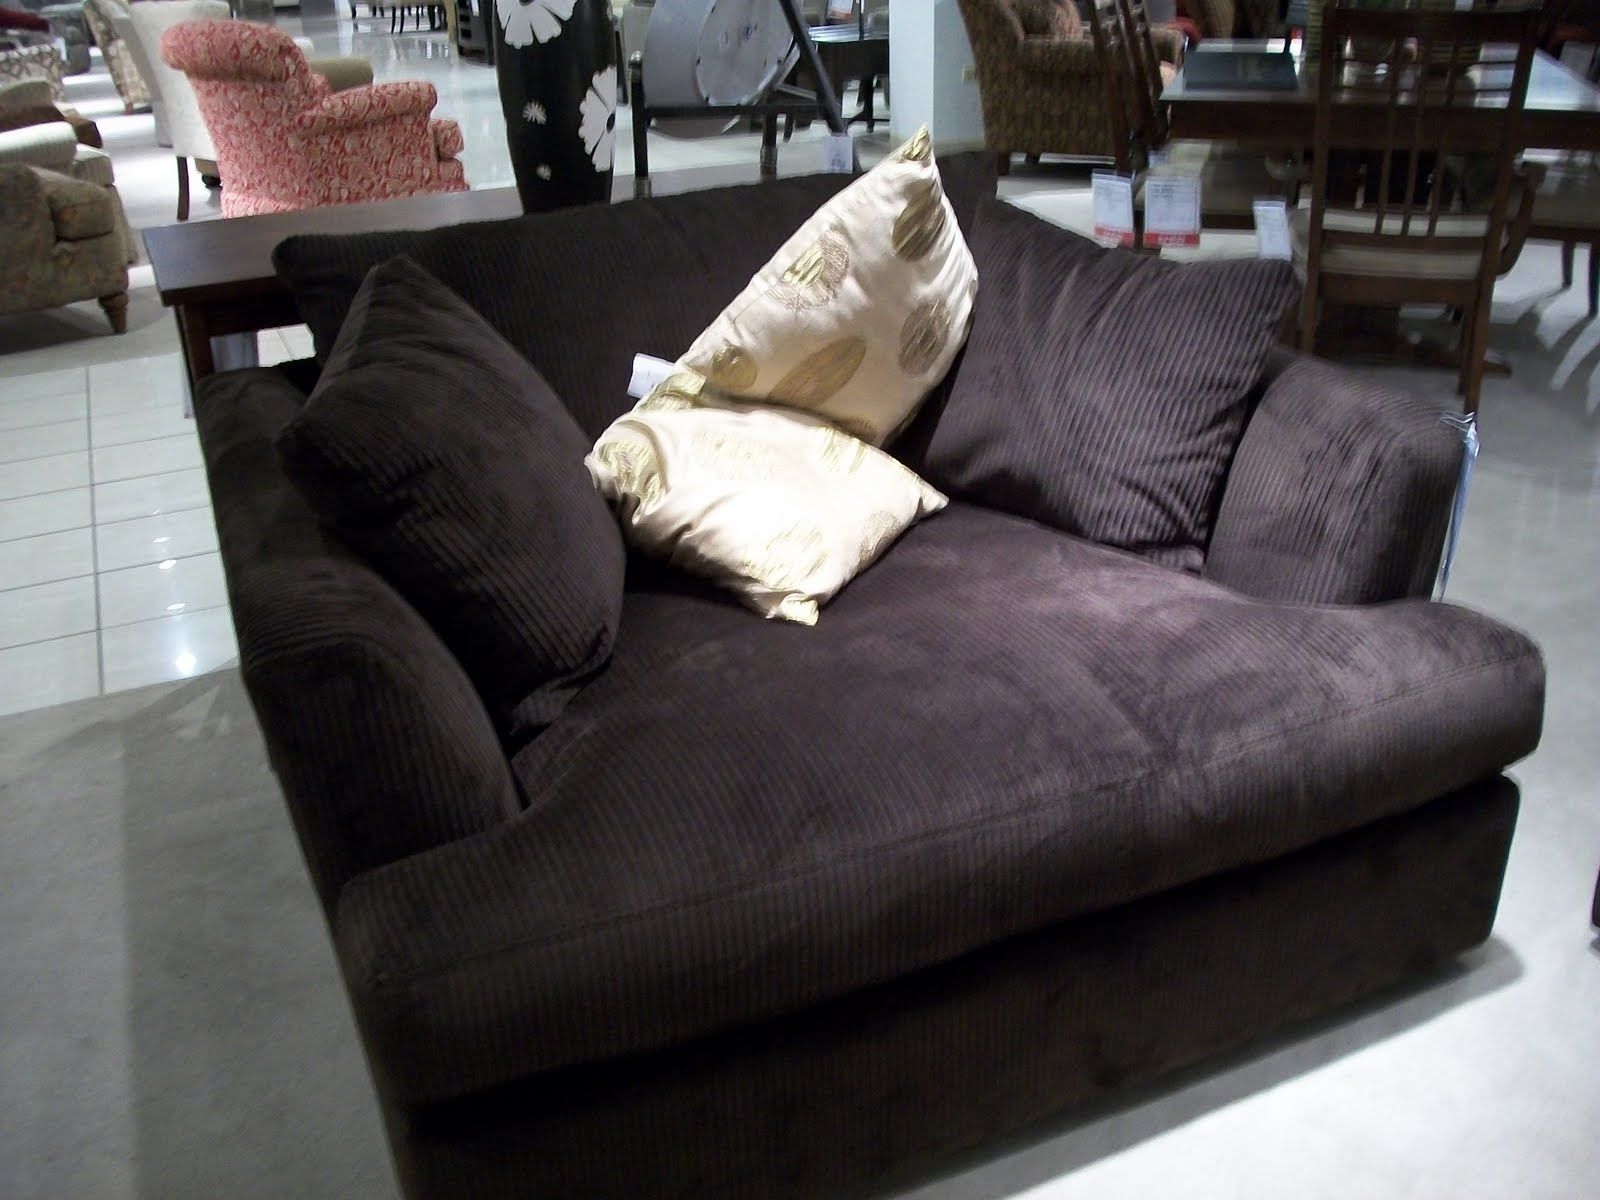 Big Comfy Oversized Armchair Where You Can Snuggle Up With A Good Inside Big Round Sofa Chairs (View 1 of 15)